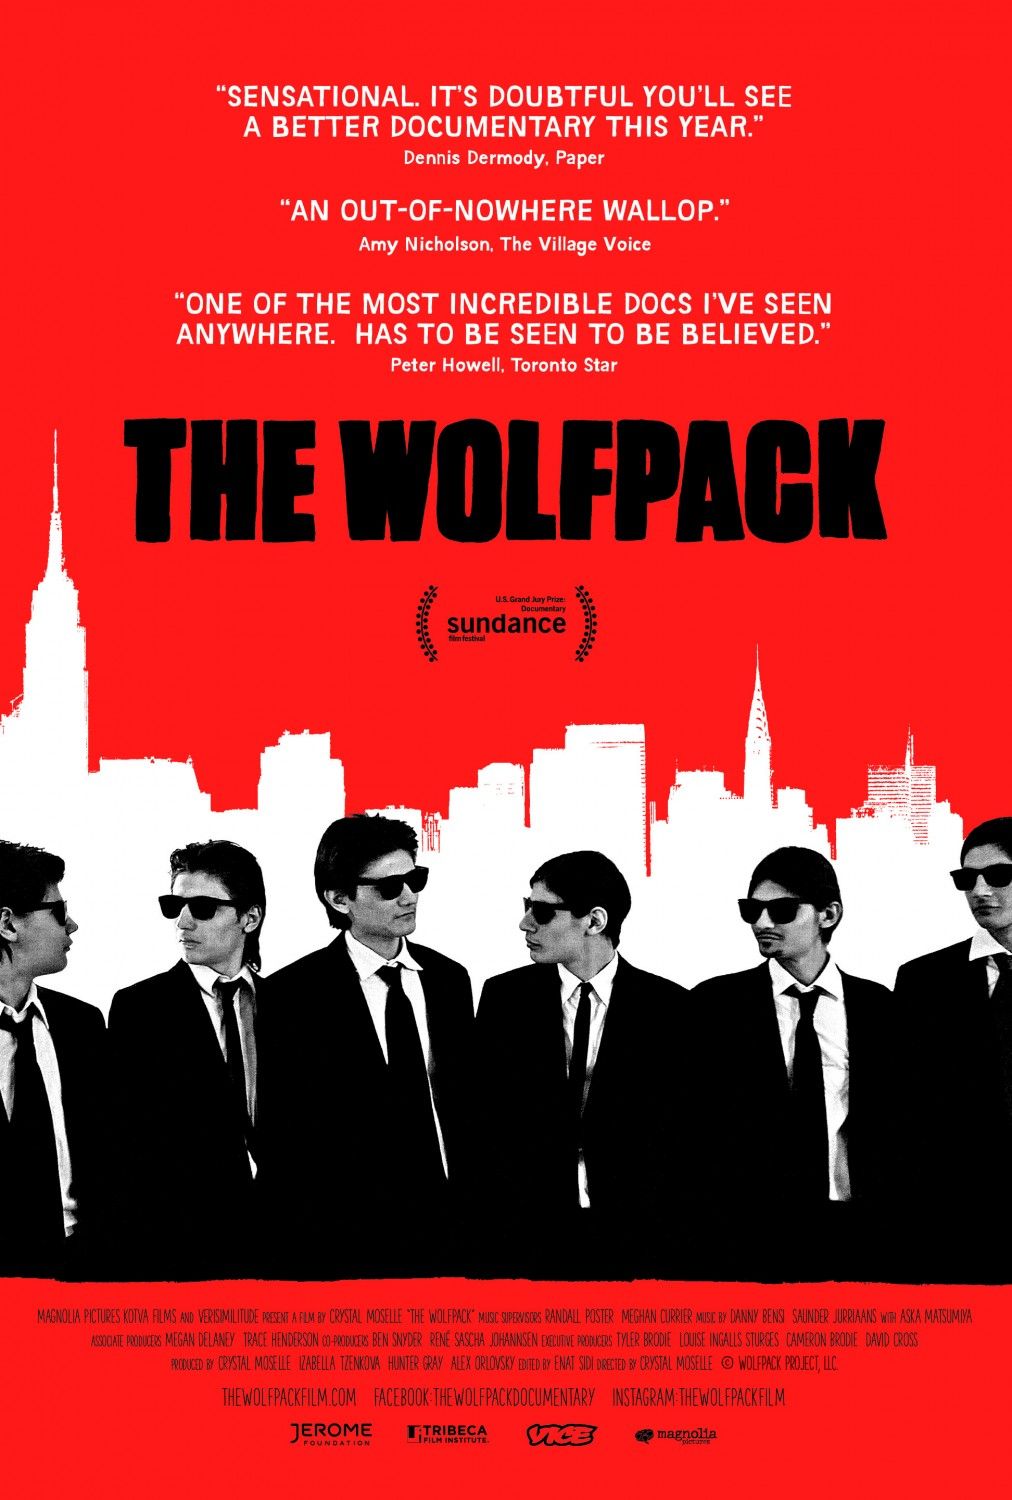 Poster for 2015 documentary The Wolfpack